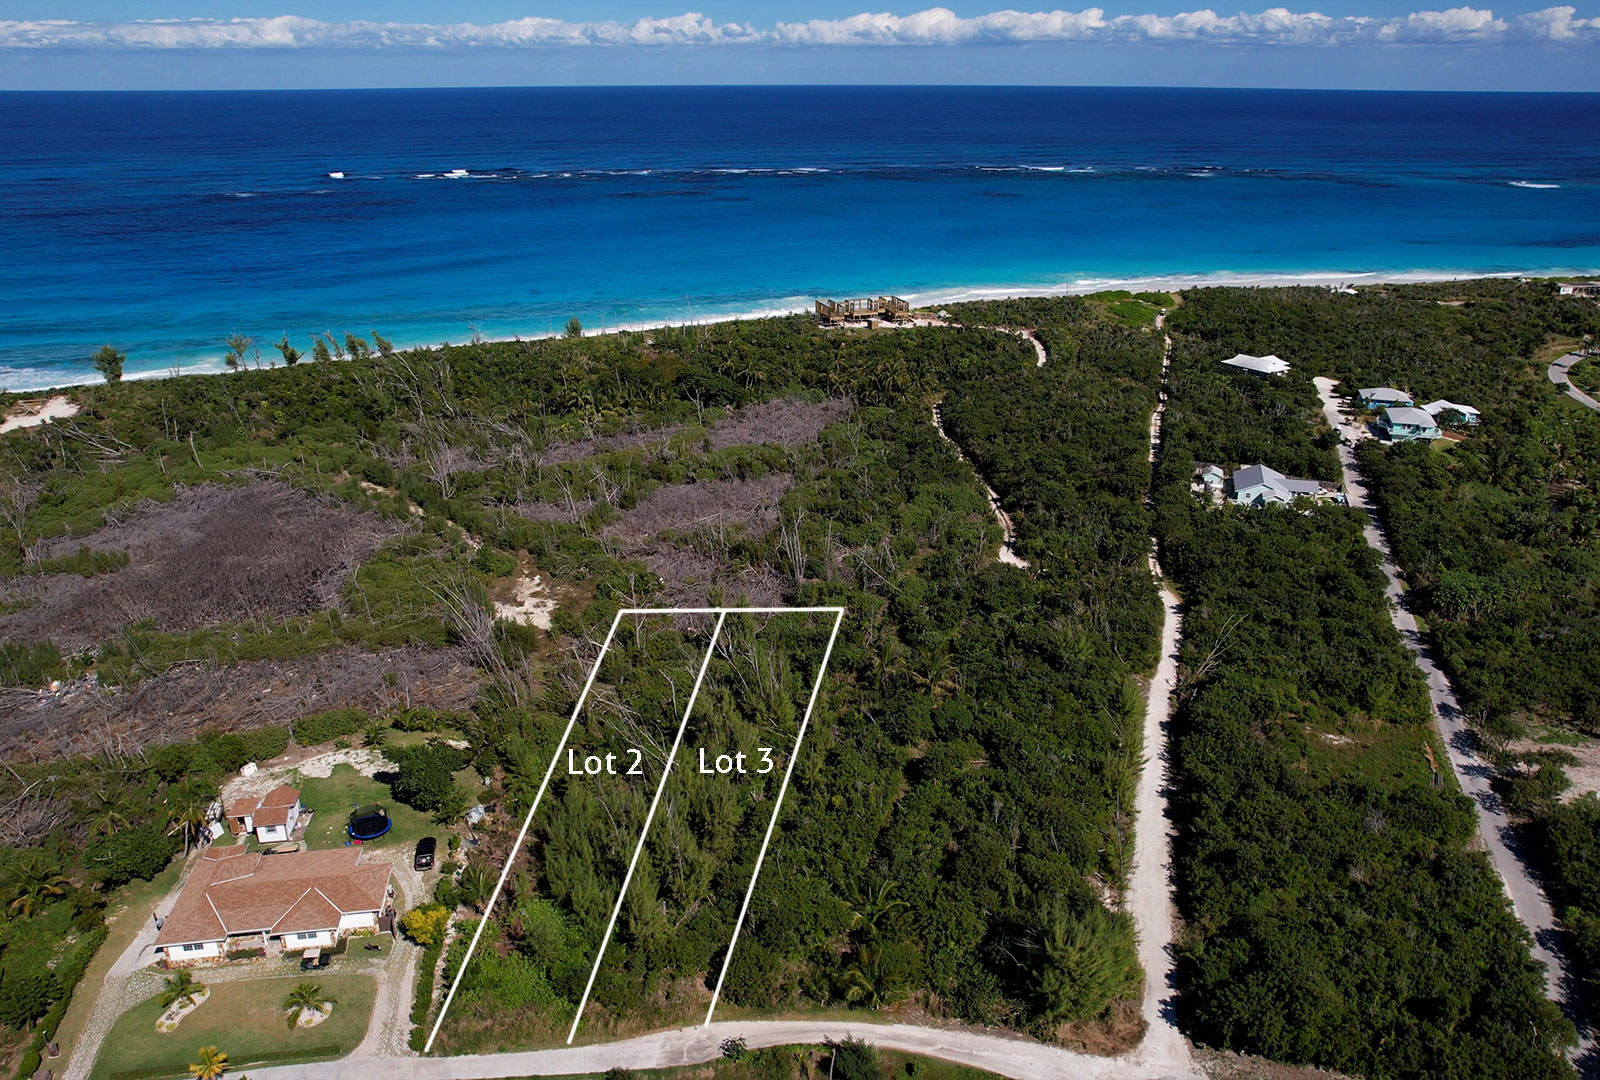 Lot #3 in the Settlement of Great Guana Cay